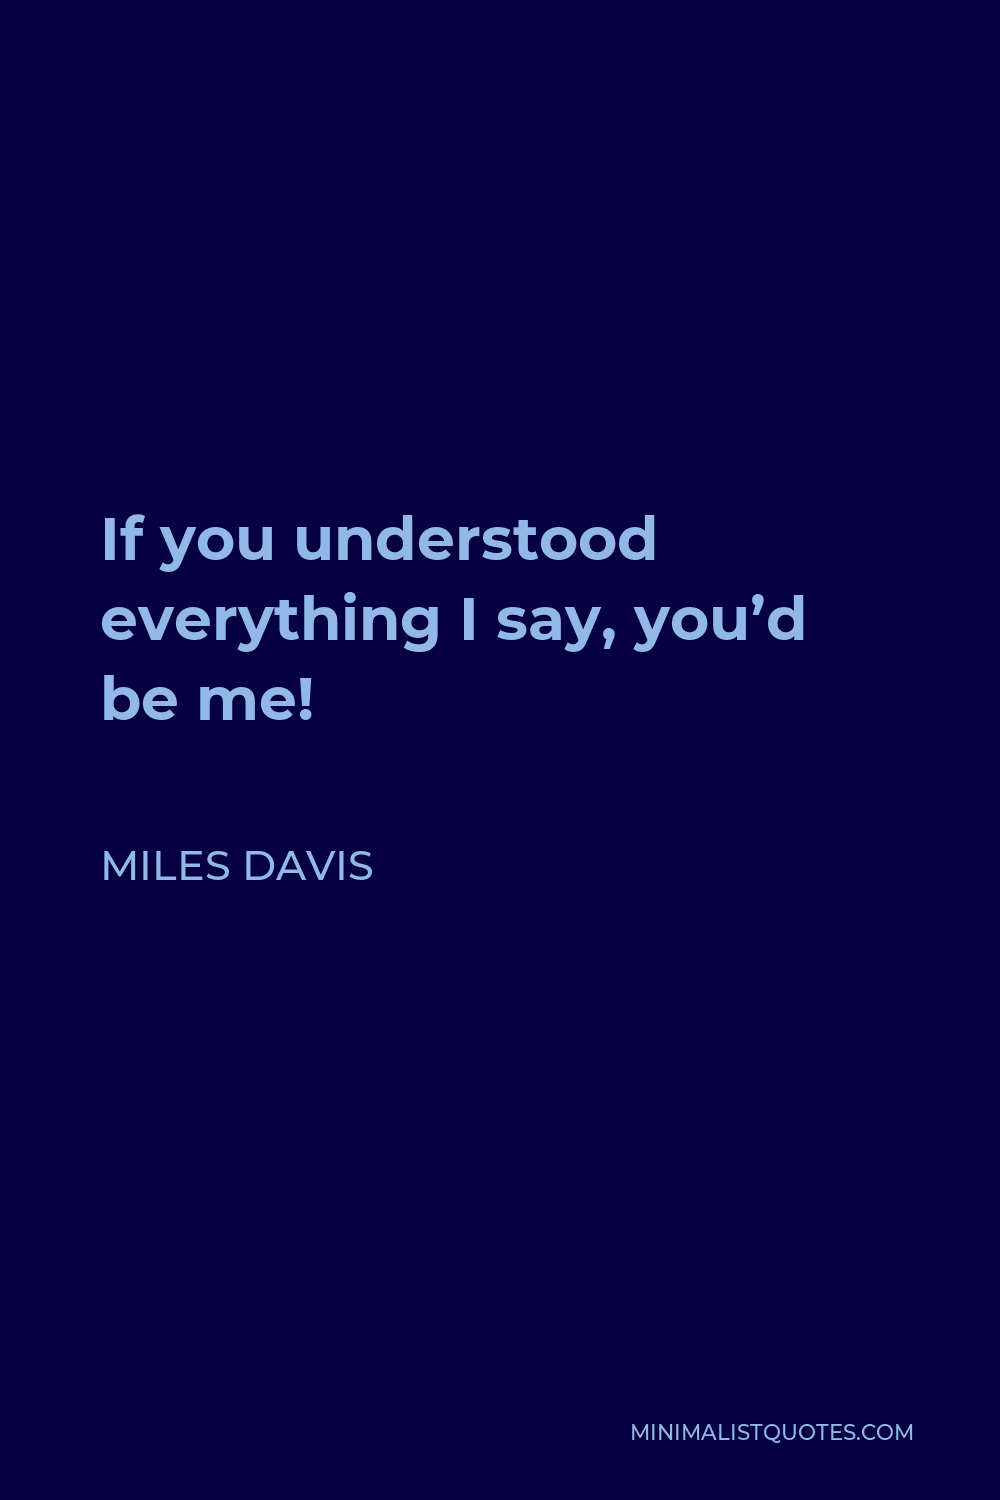 Miles Davis Quote - If you understood everything I say, you’d be me!